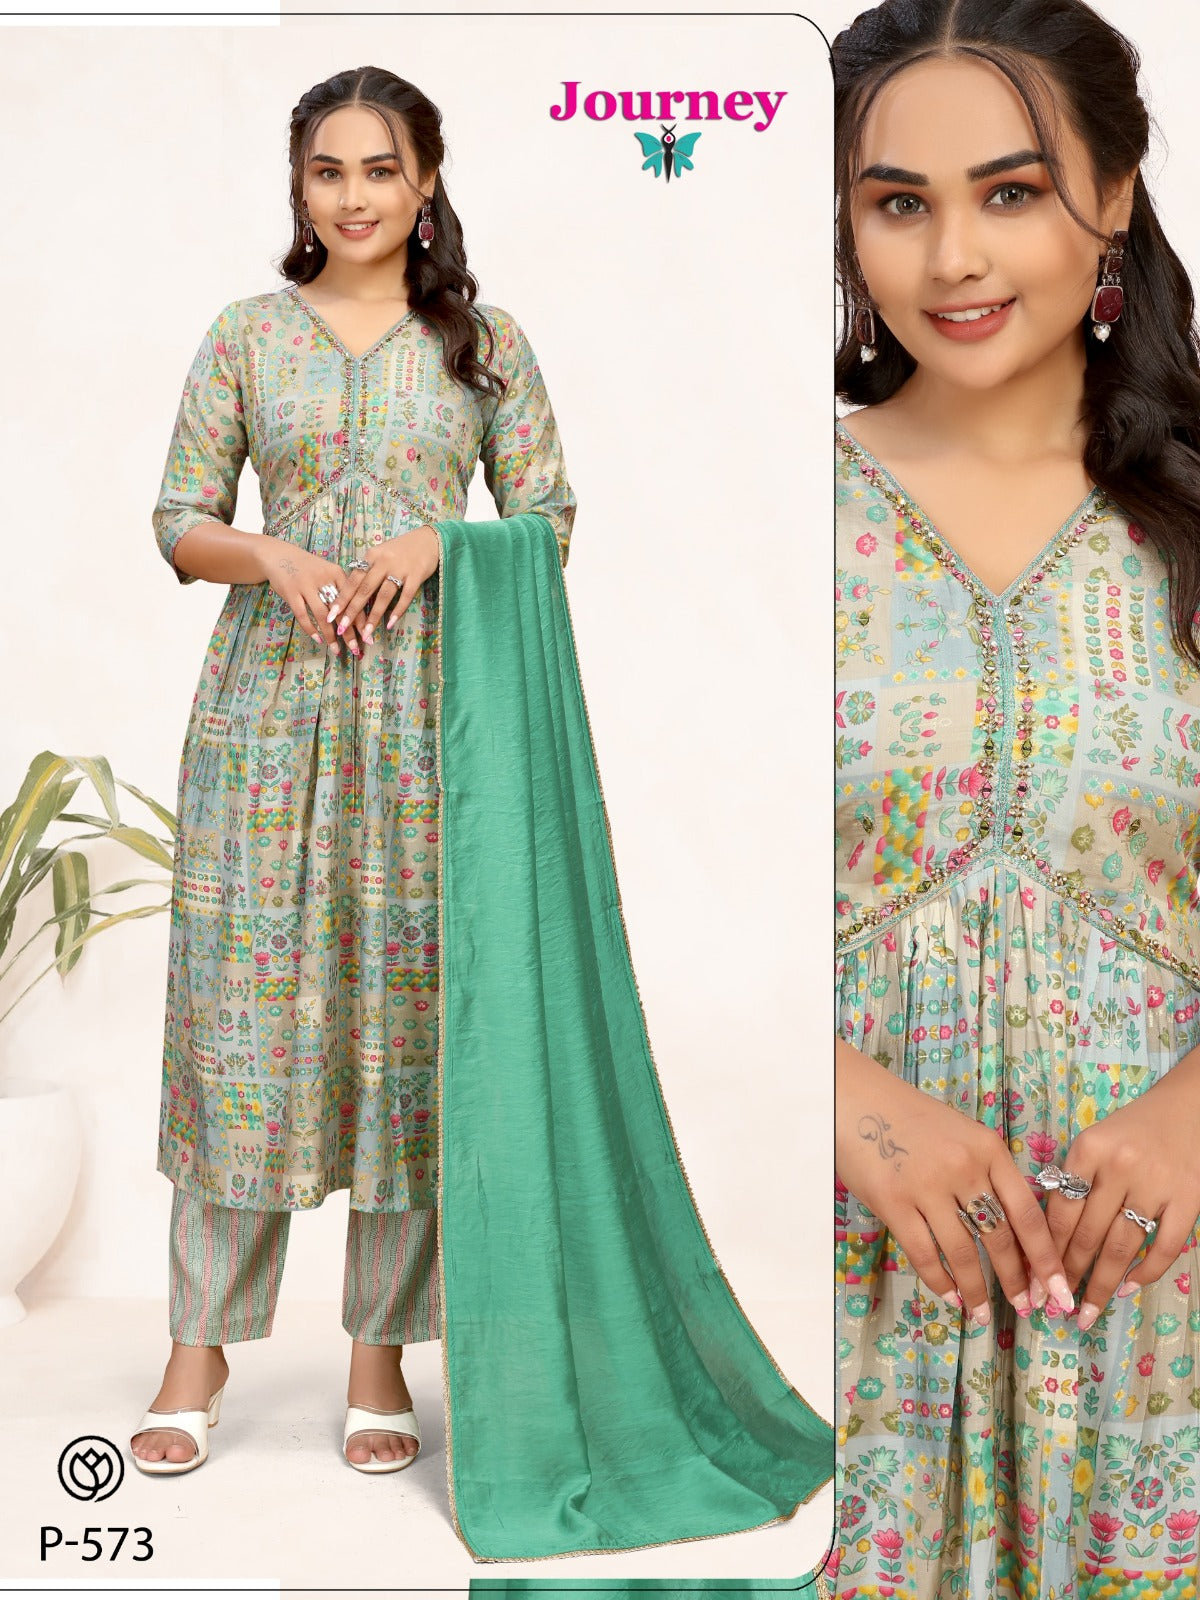 P 572-573 Journey Design Modal Chanderi Readymade Pant Style Suits